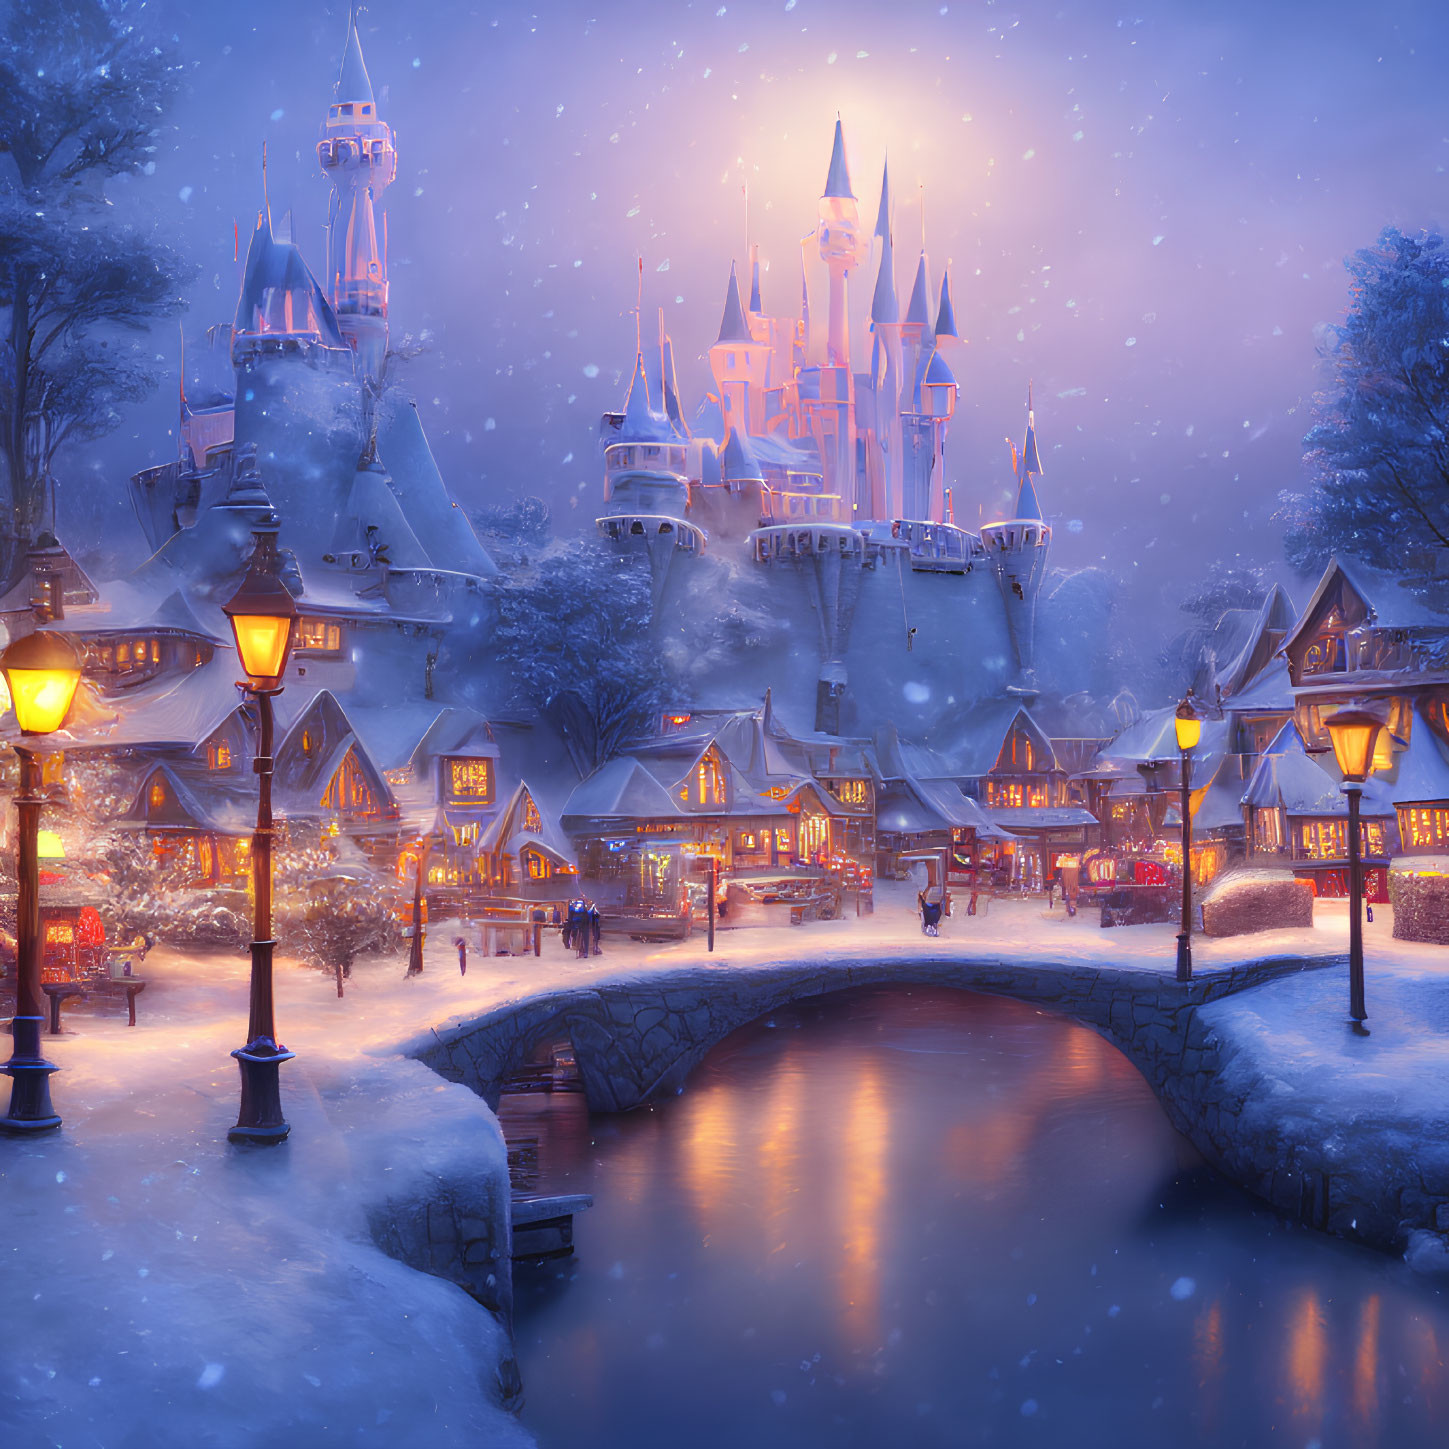 Snow-covered village with glowing street lamps and grand castle in twilight